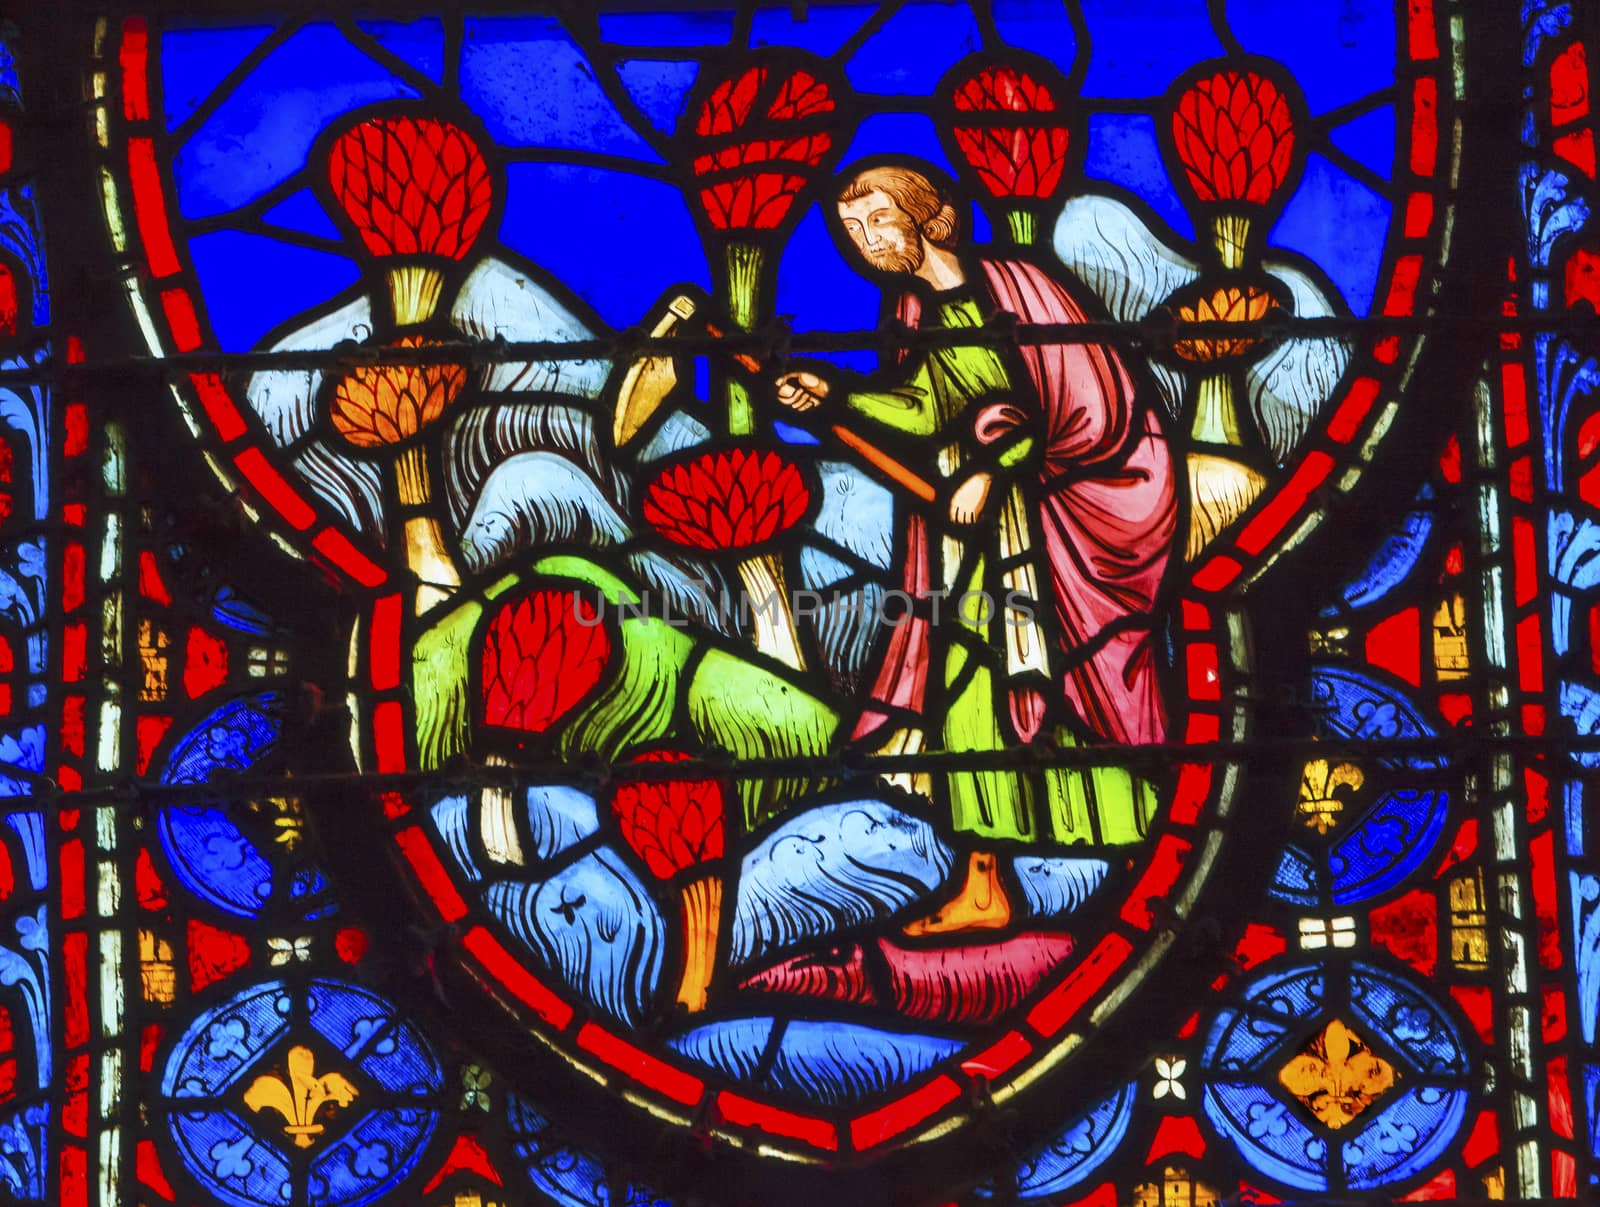 Farmers Flowers Medieval Life Stained Glass Saint Chapelle Paris France.  Saint King Louis 9th created Sainte Chapelle in 1248 to house Christian relics, including Christ's Crown of Thorns.  Stained Glass created in the 13th Century and shows various biblical stories along with stories from 1200s.